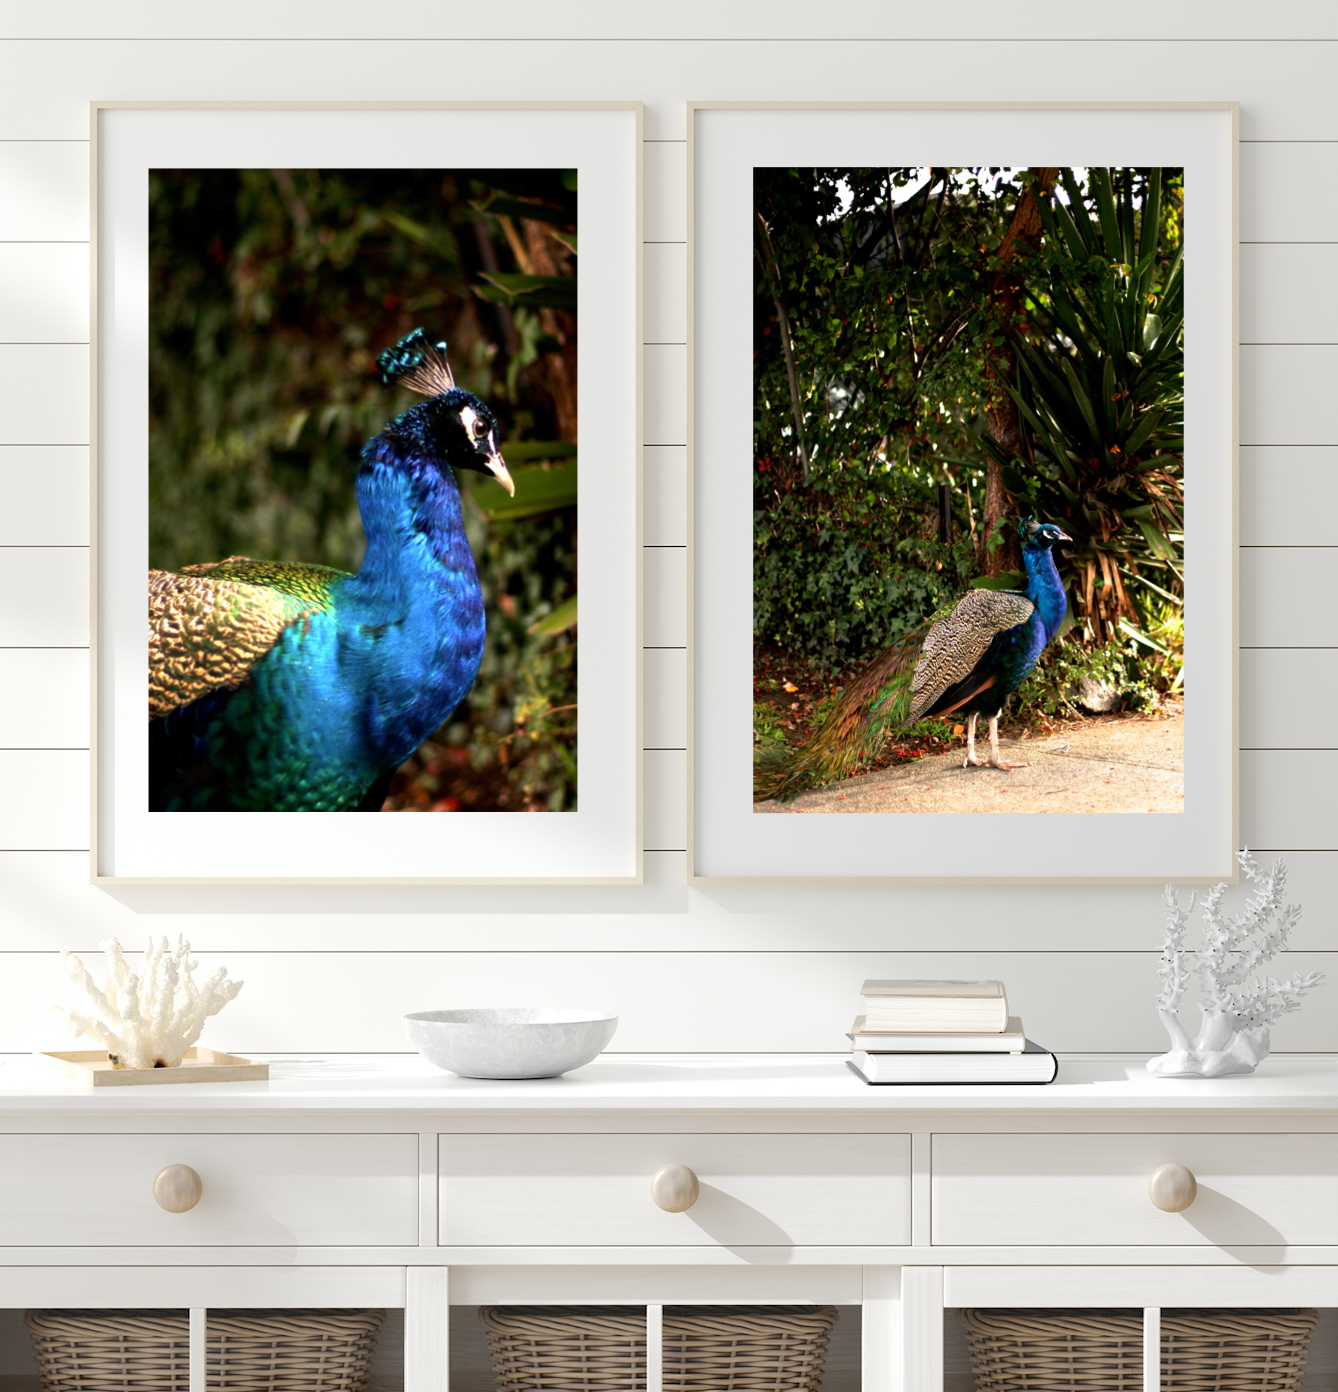 Iridescent Peacock Nº 9 & Nº 10 • Set of Two Fine Photography Prints